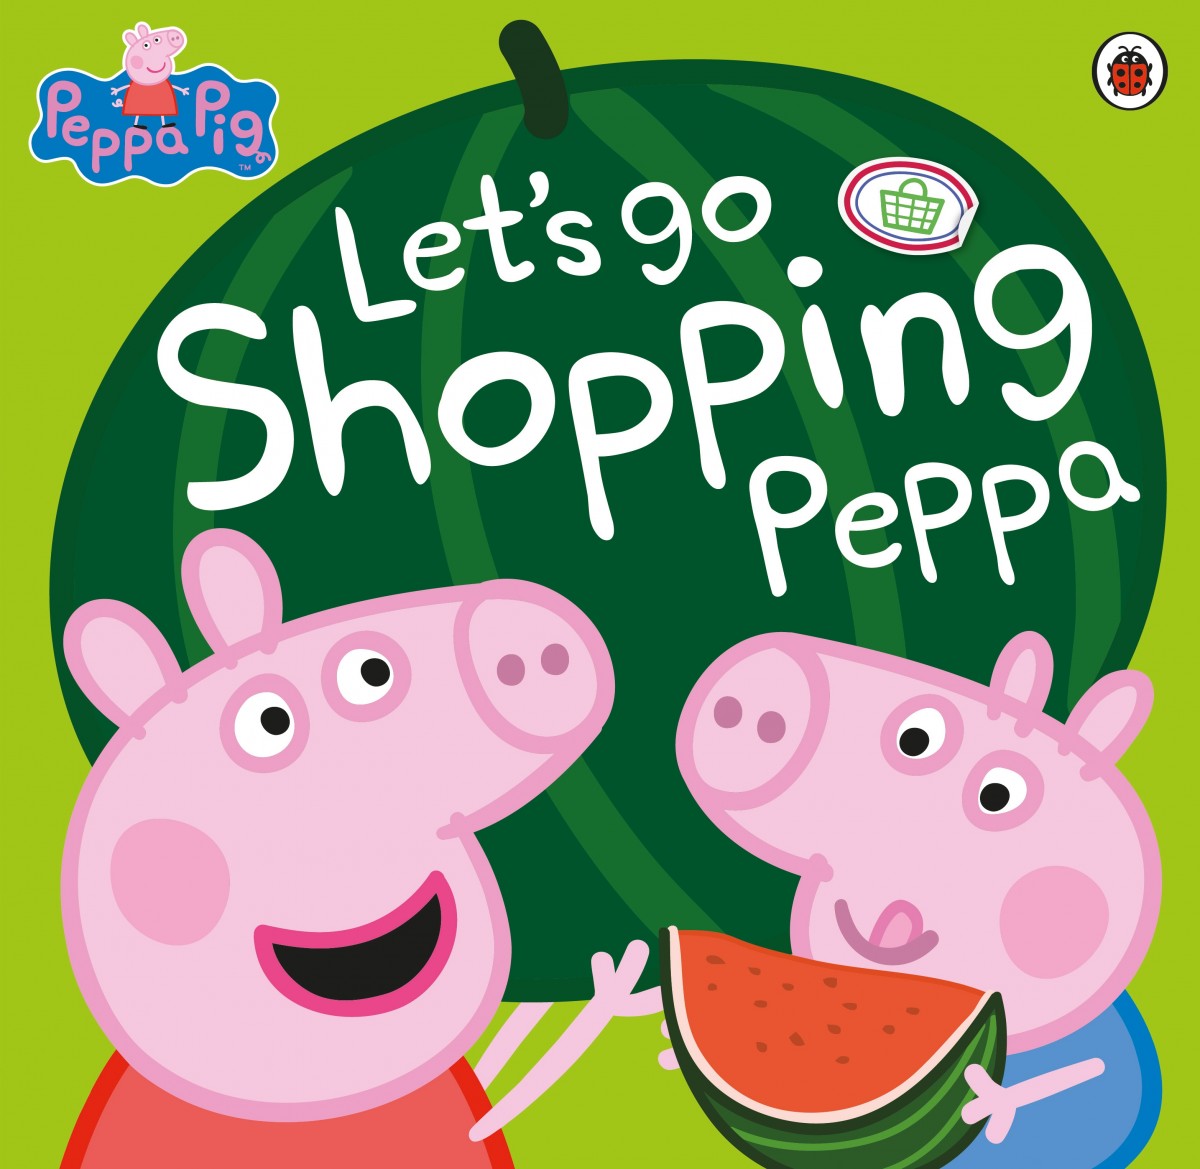 Let's go shopping peppa